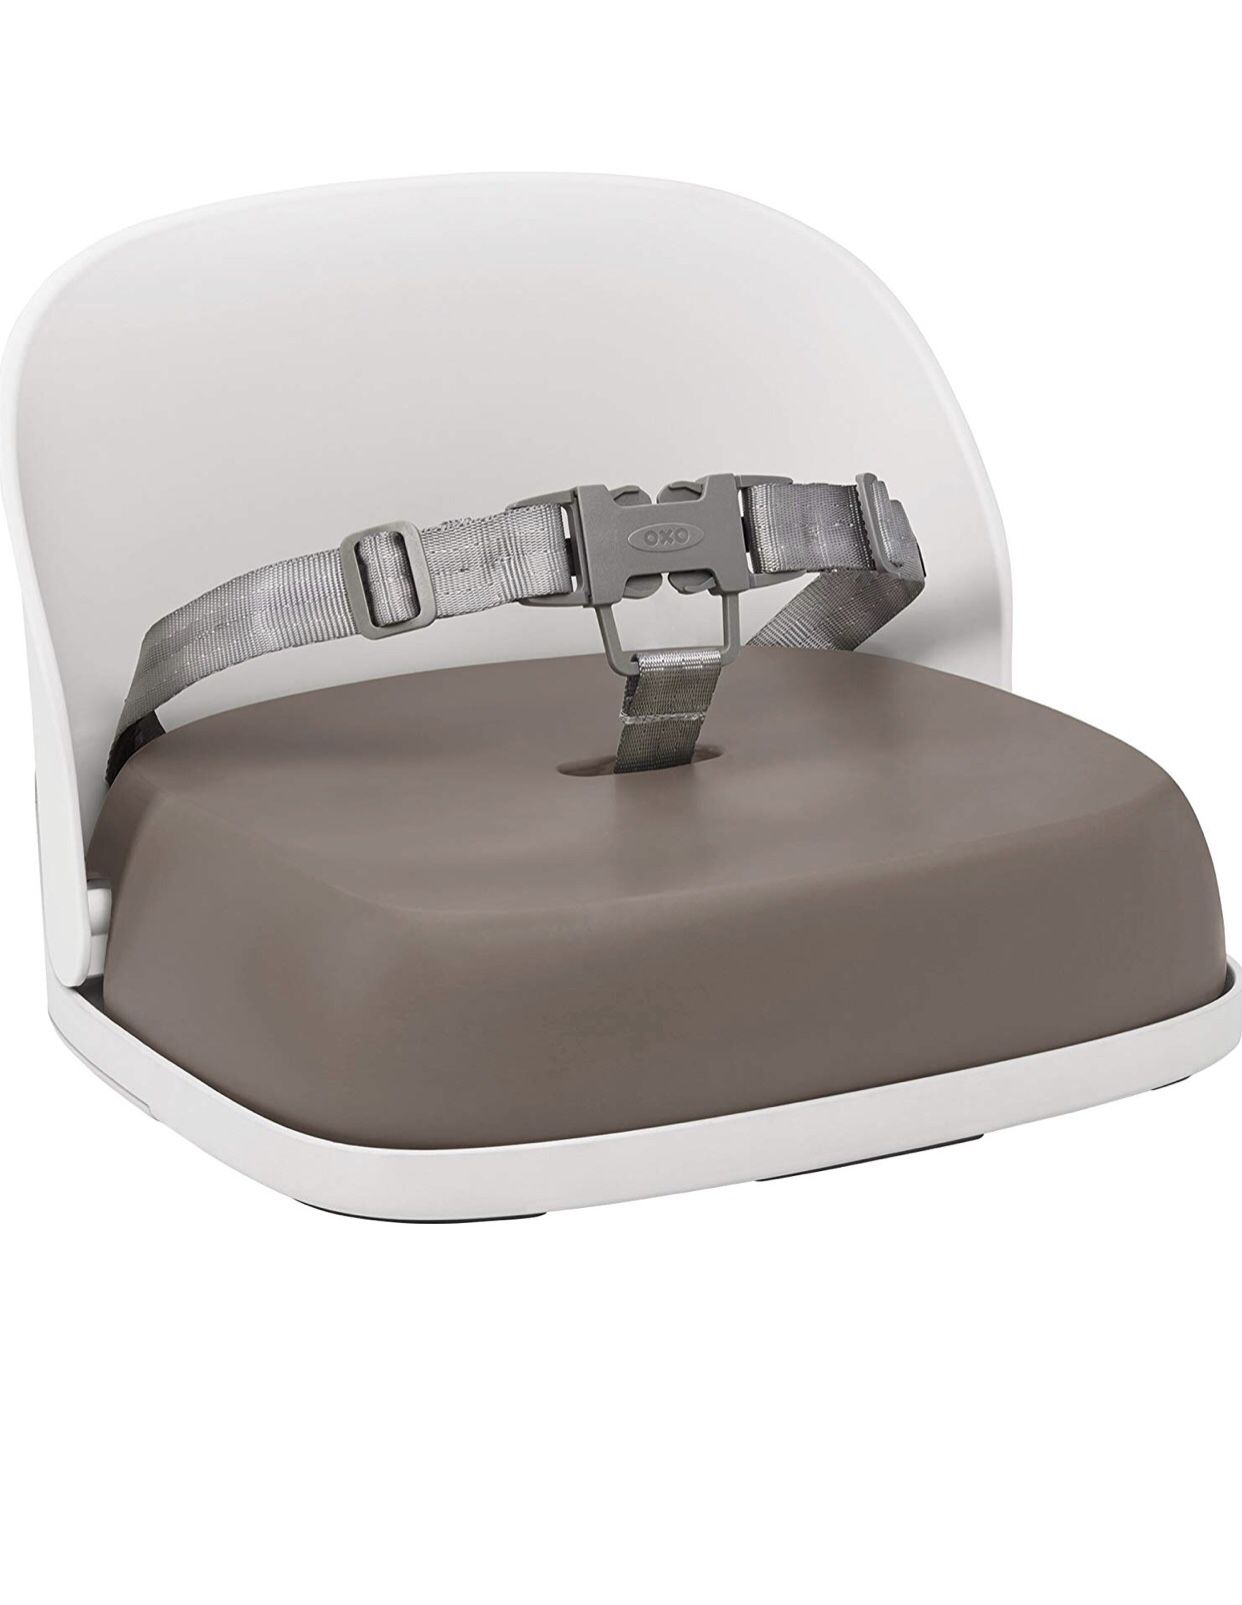 Tot Perch Booster Seat with straps and plastic cover